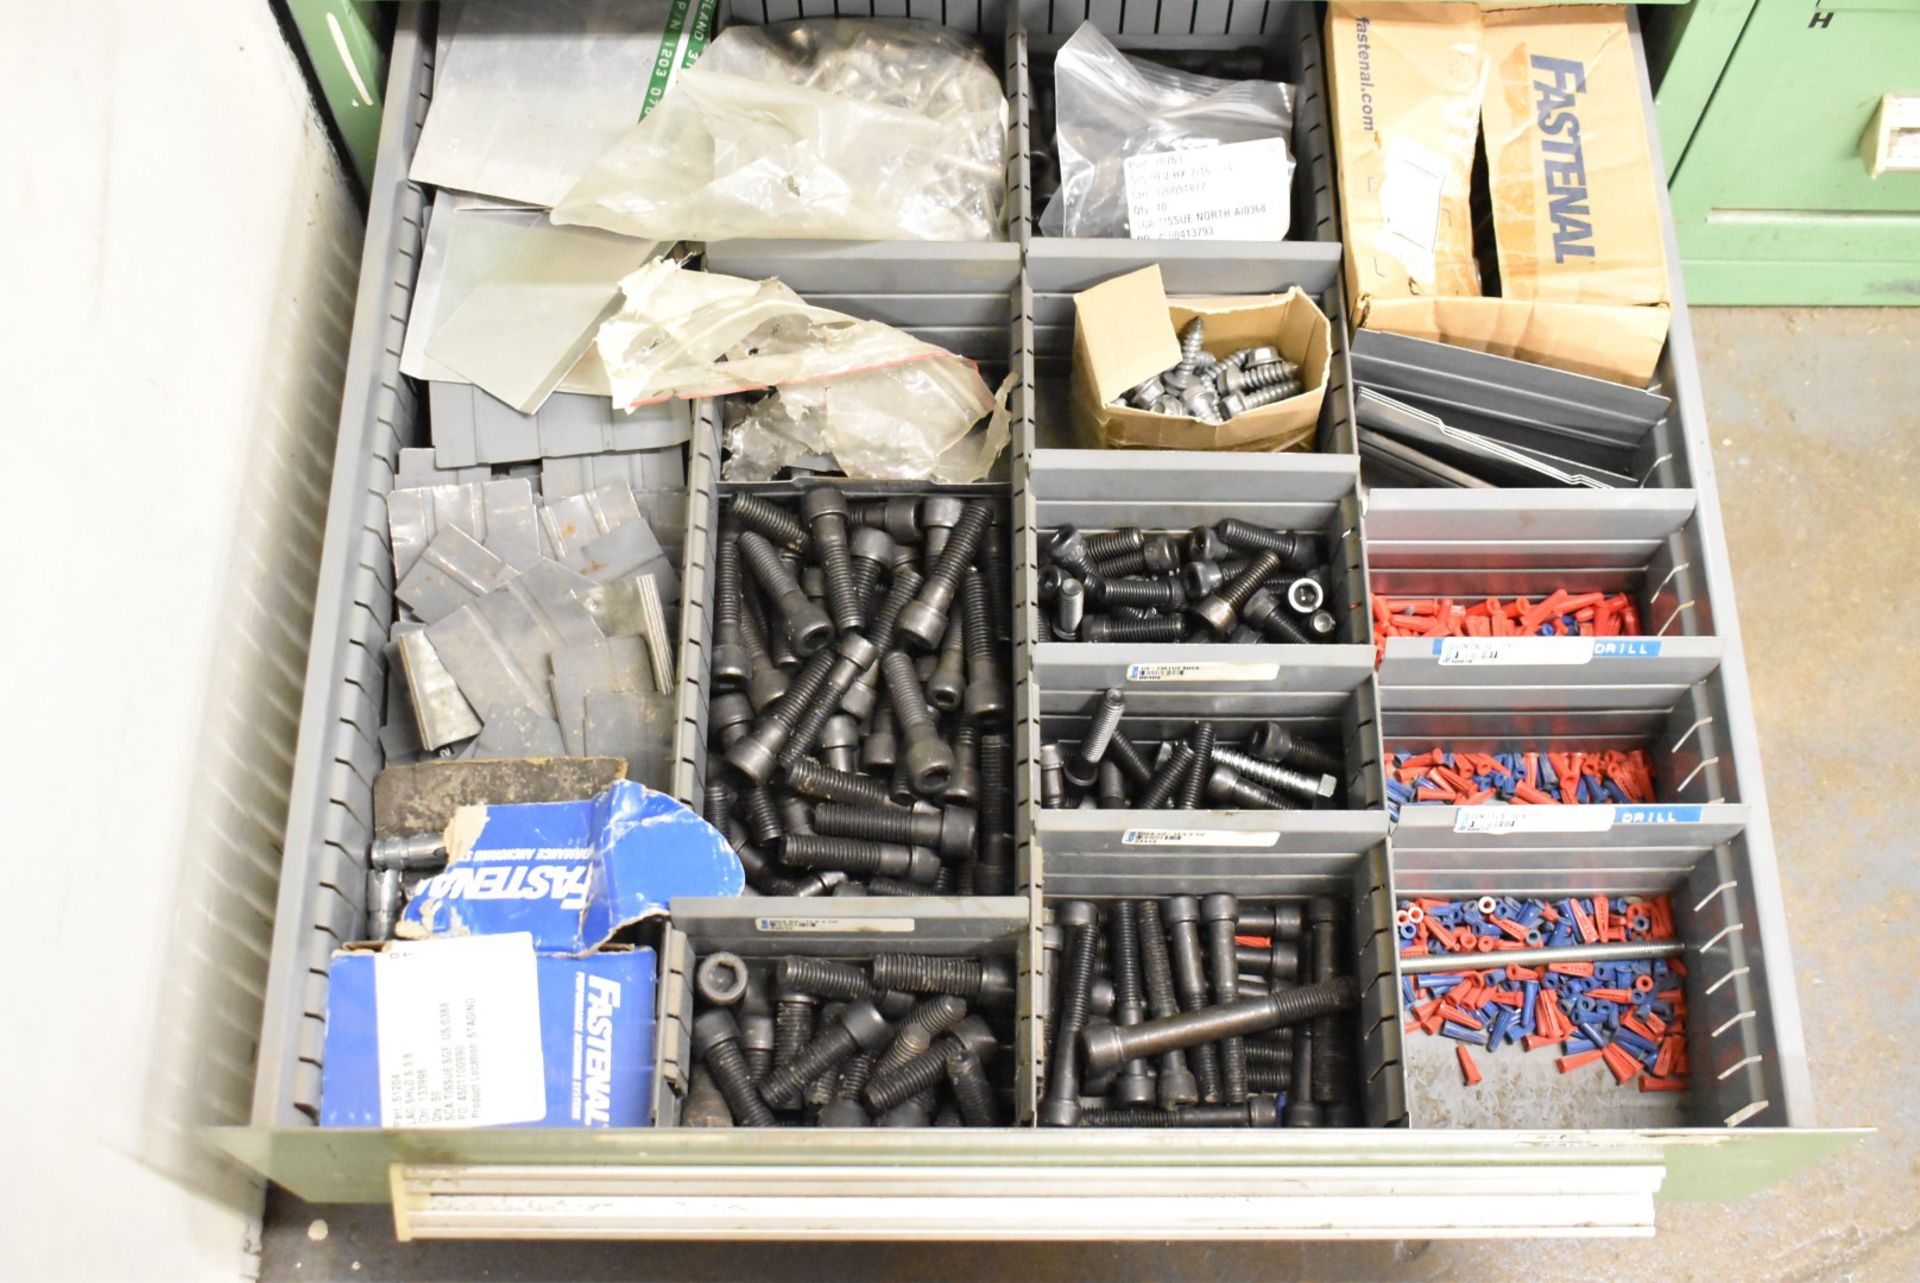 LOT/ CONTENTS OF CABINET - INCLUDING STAINLESS STEEL HARDWARE, HARDWARE, SET SCREWS (TOOL CABINET - Image 9 of 9